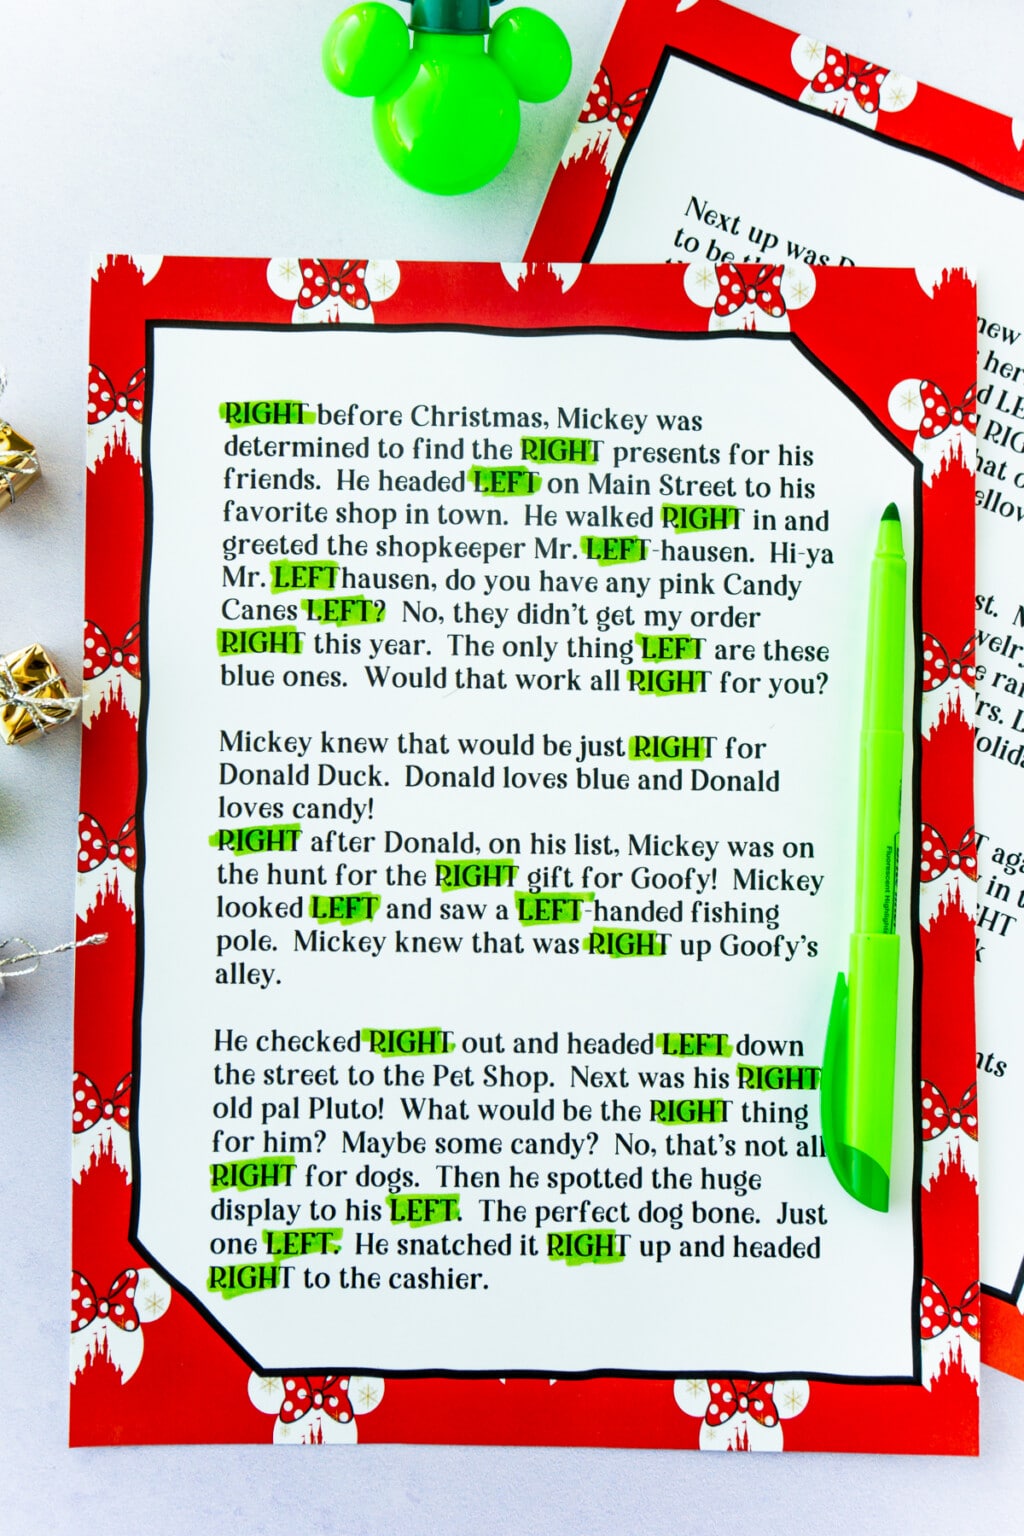 fun-left-right-christmas-game-4-printable-stories-play-party-plan